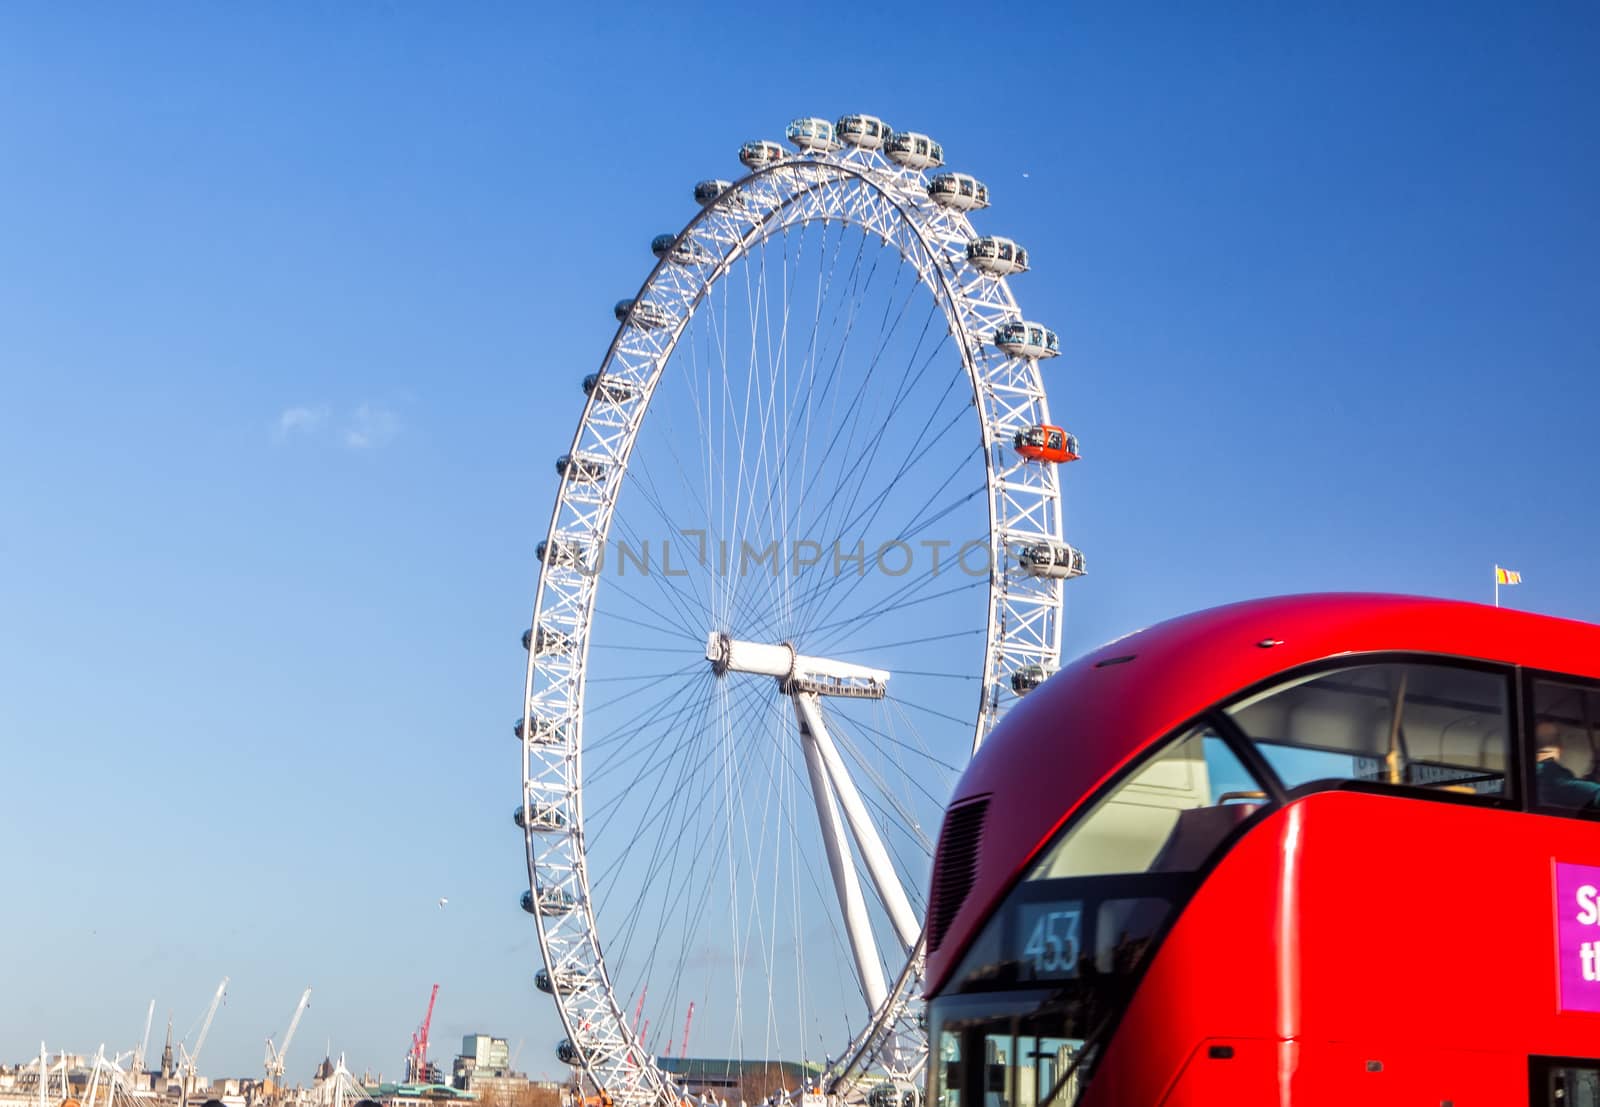 London Eye (135 m tall, diameter of 120 m), a famous tourist attraction over river Thames